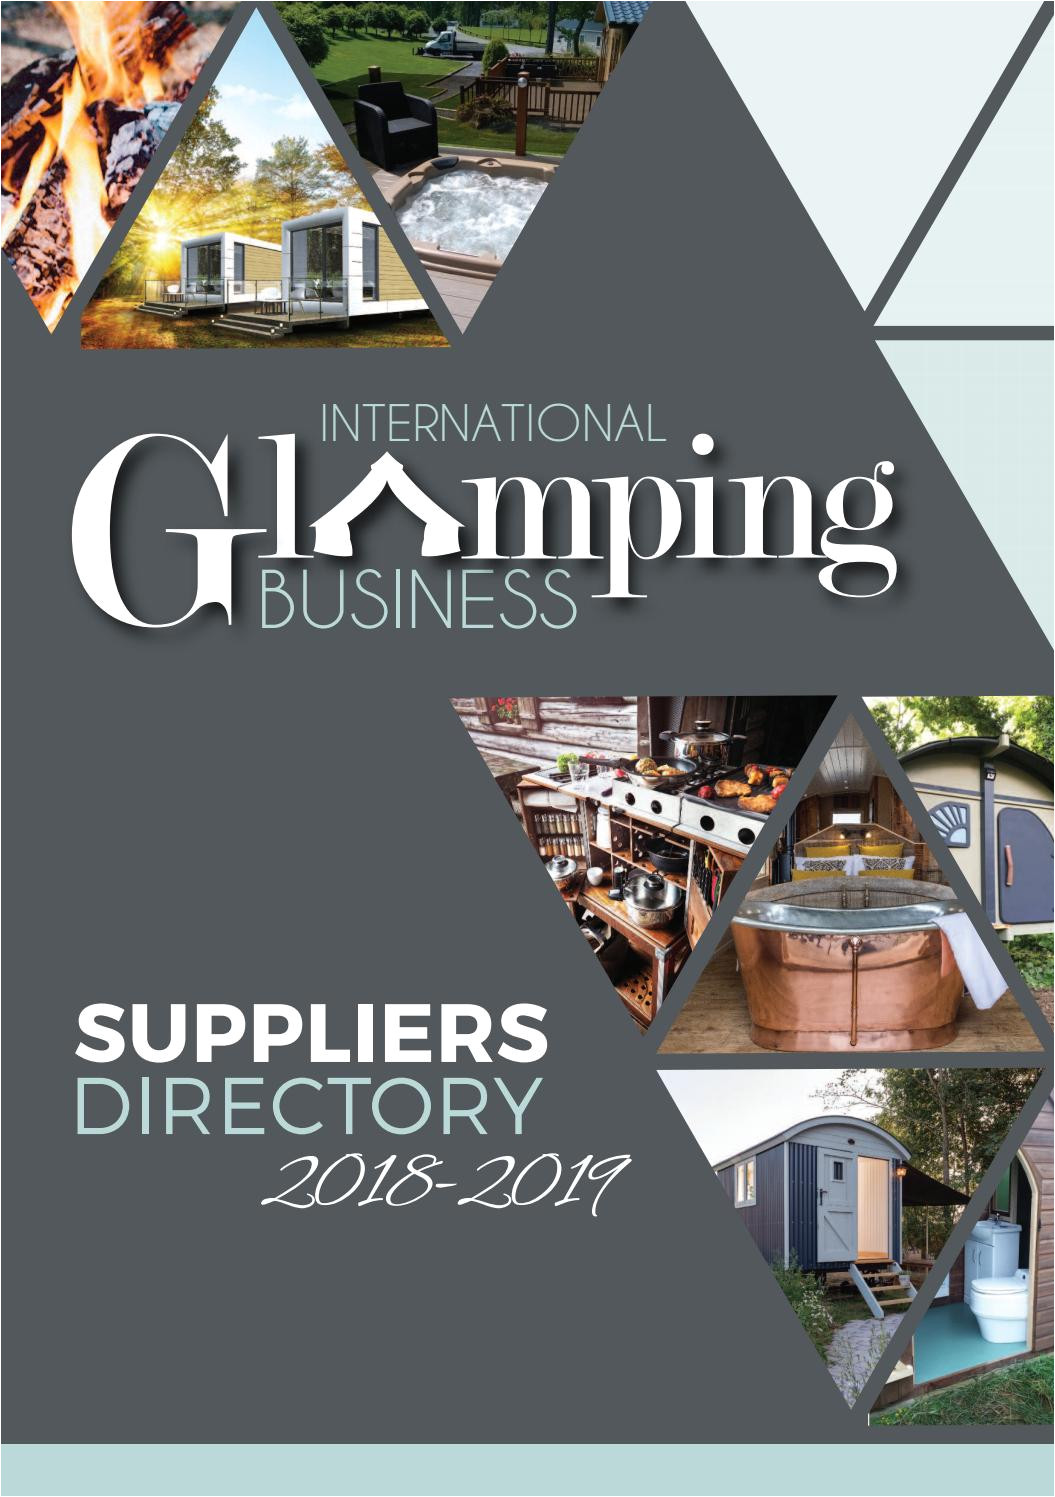 glamping business suppliers directory 2018 9 by holiday parks management international glamping business issuu